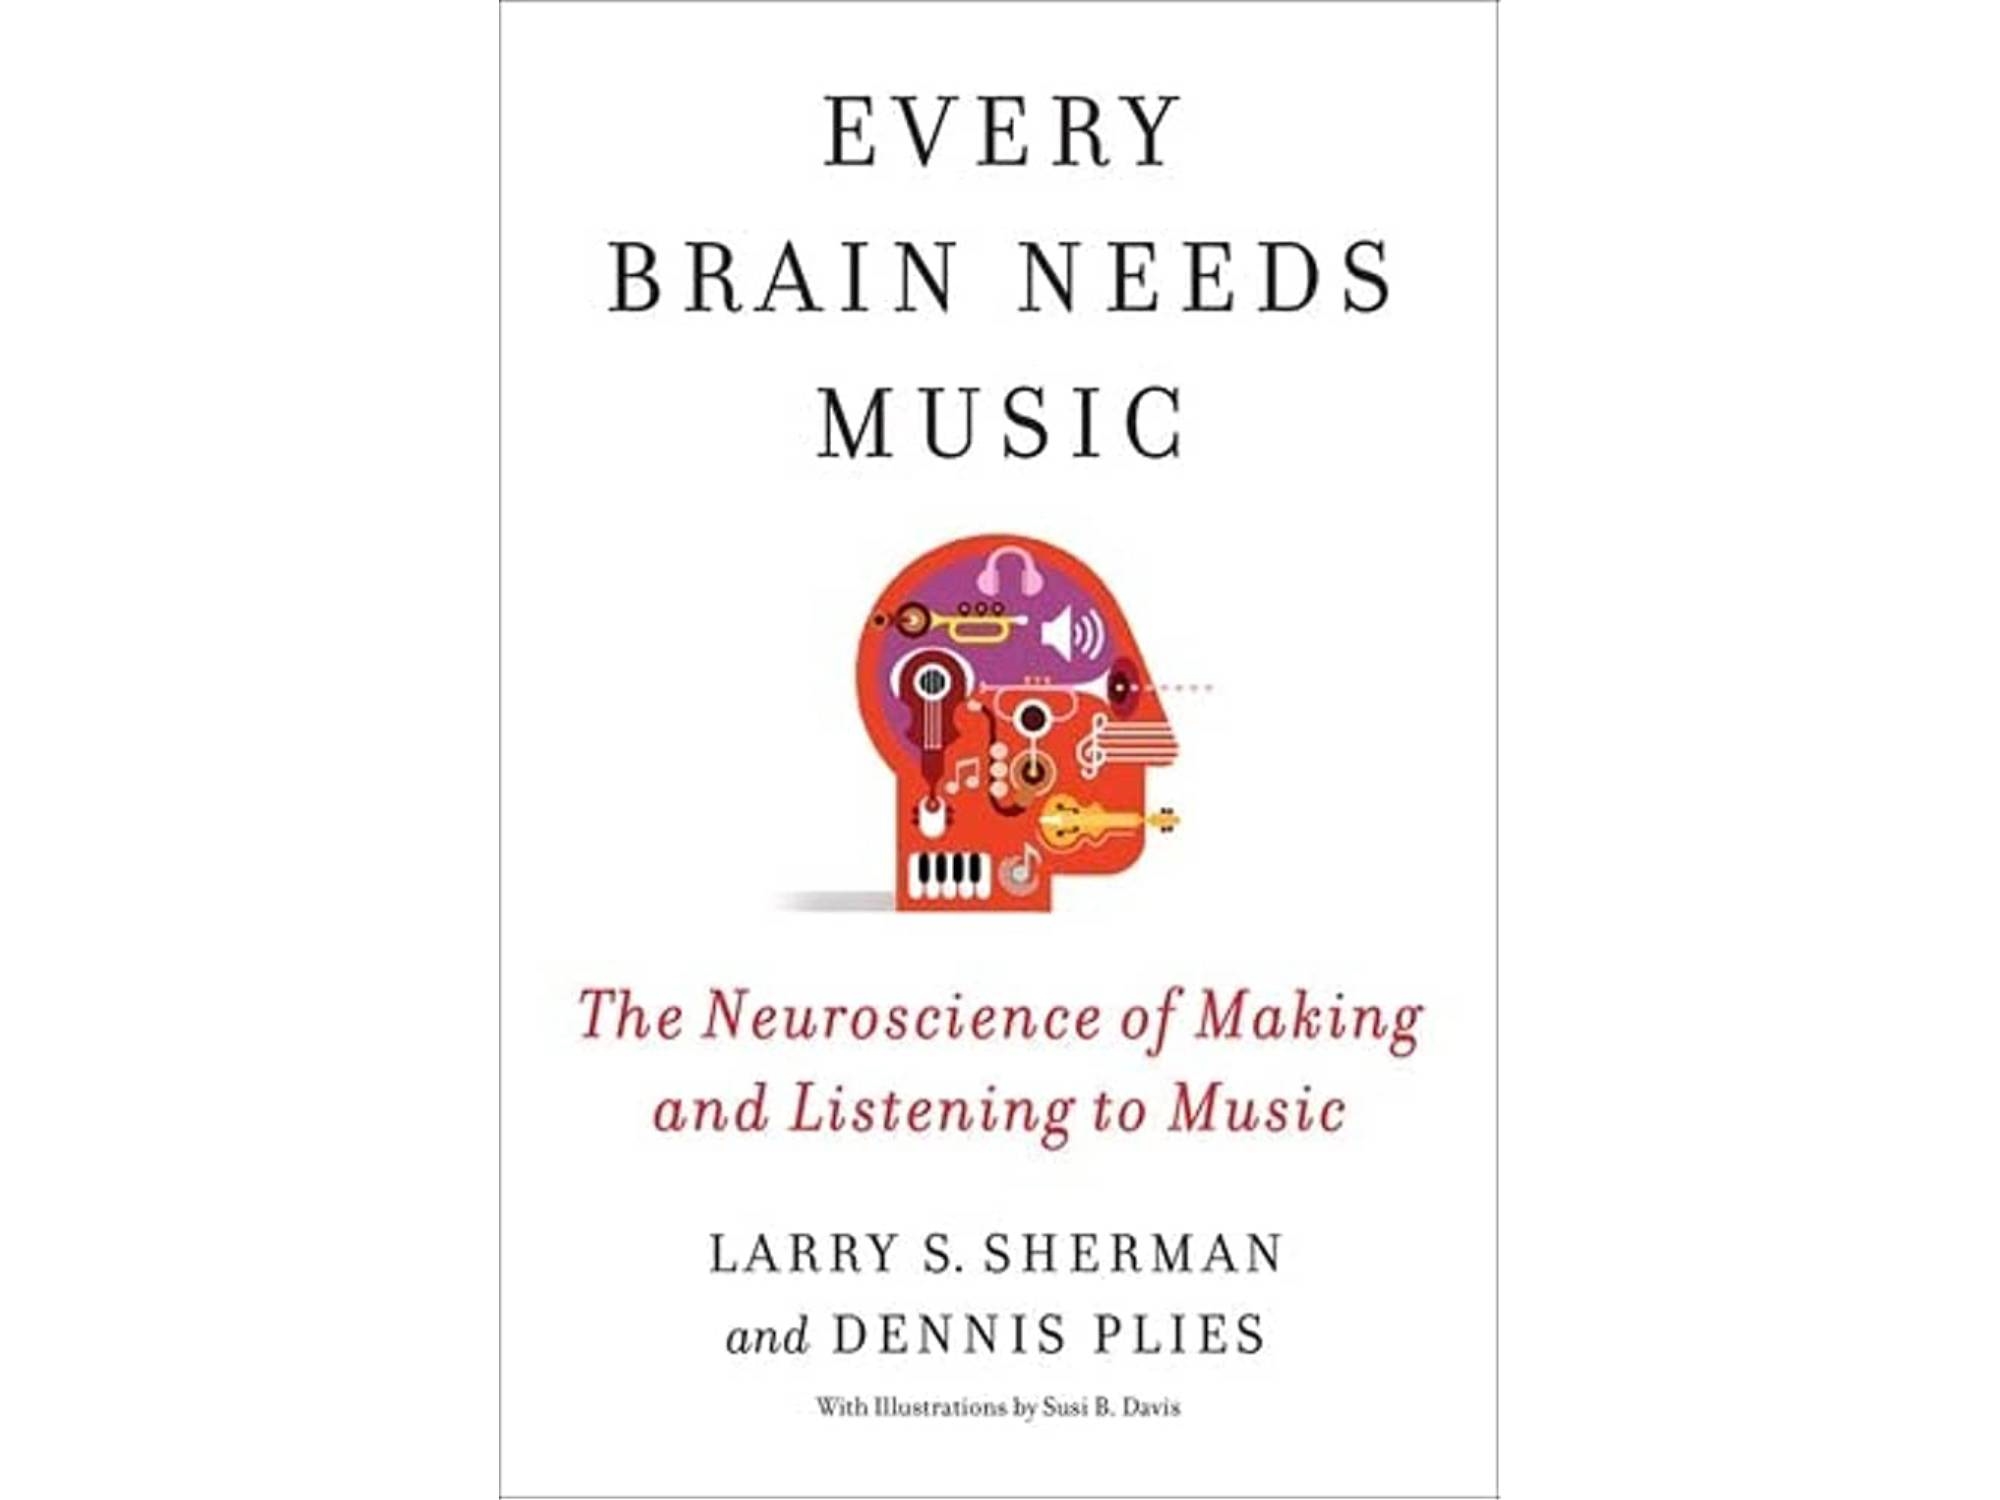 Books: How music chords hack your brain to elicit emotion | DeviceDaily.com